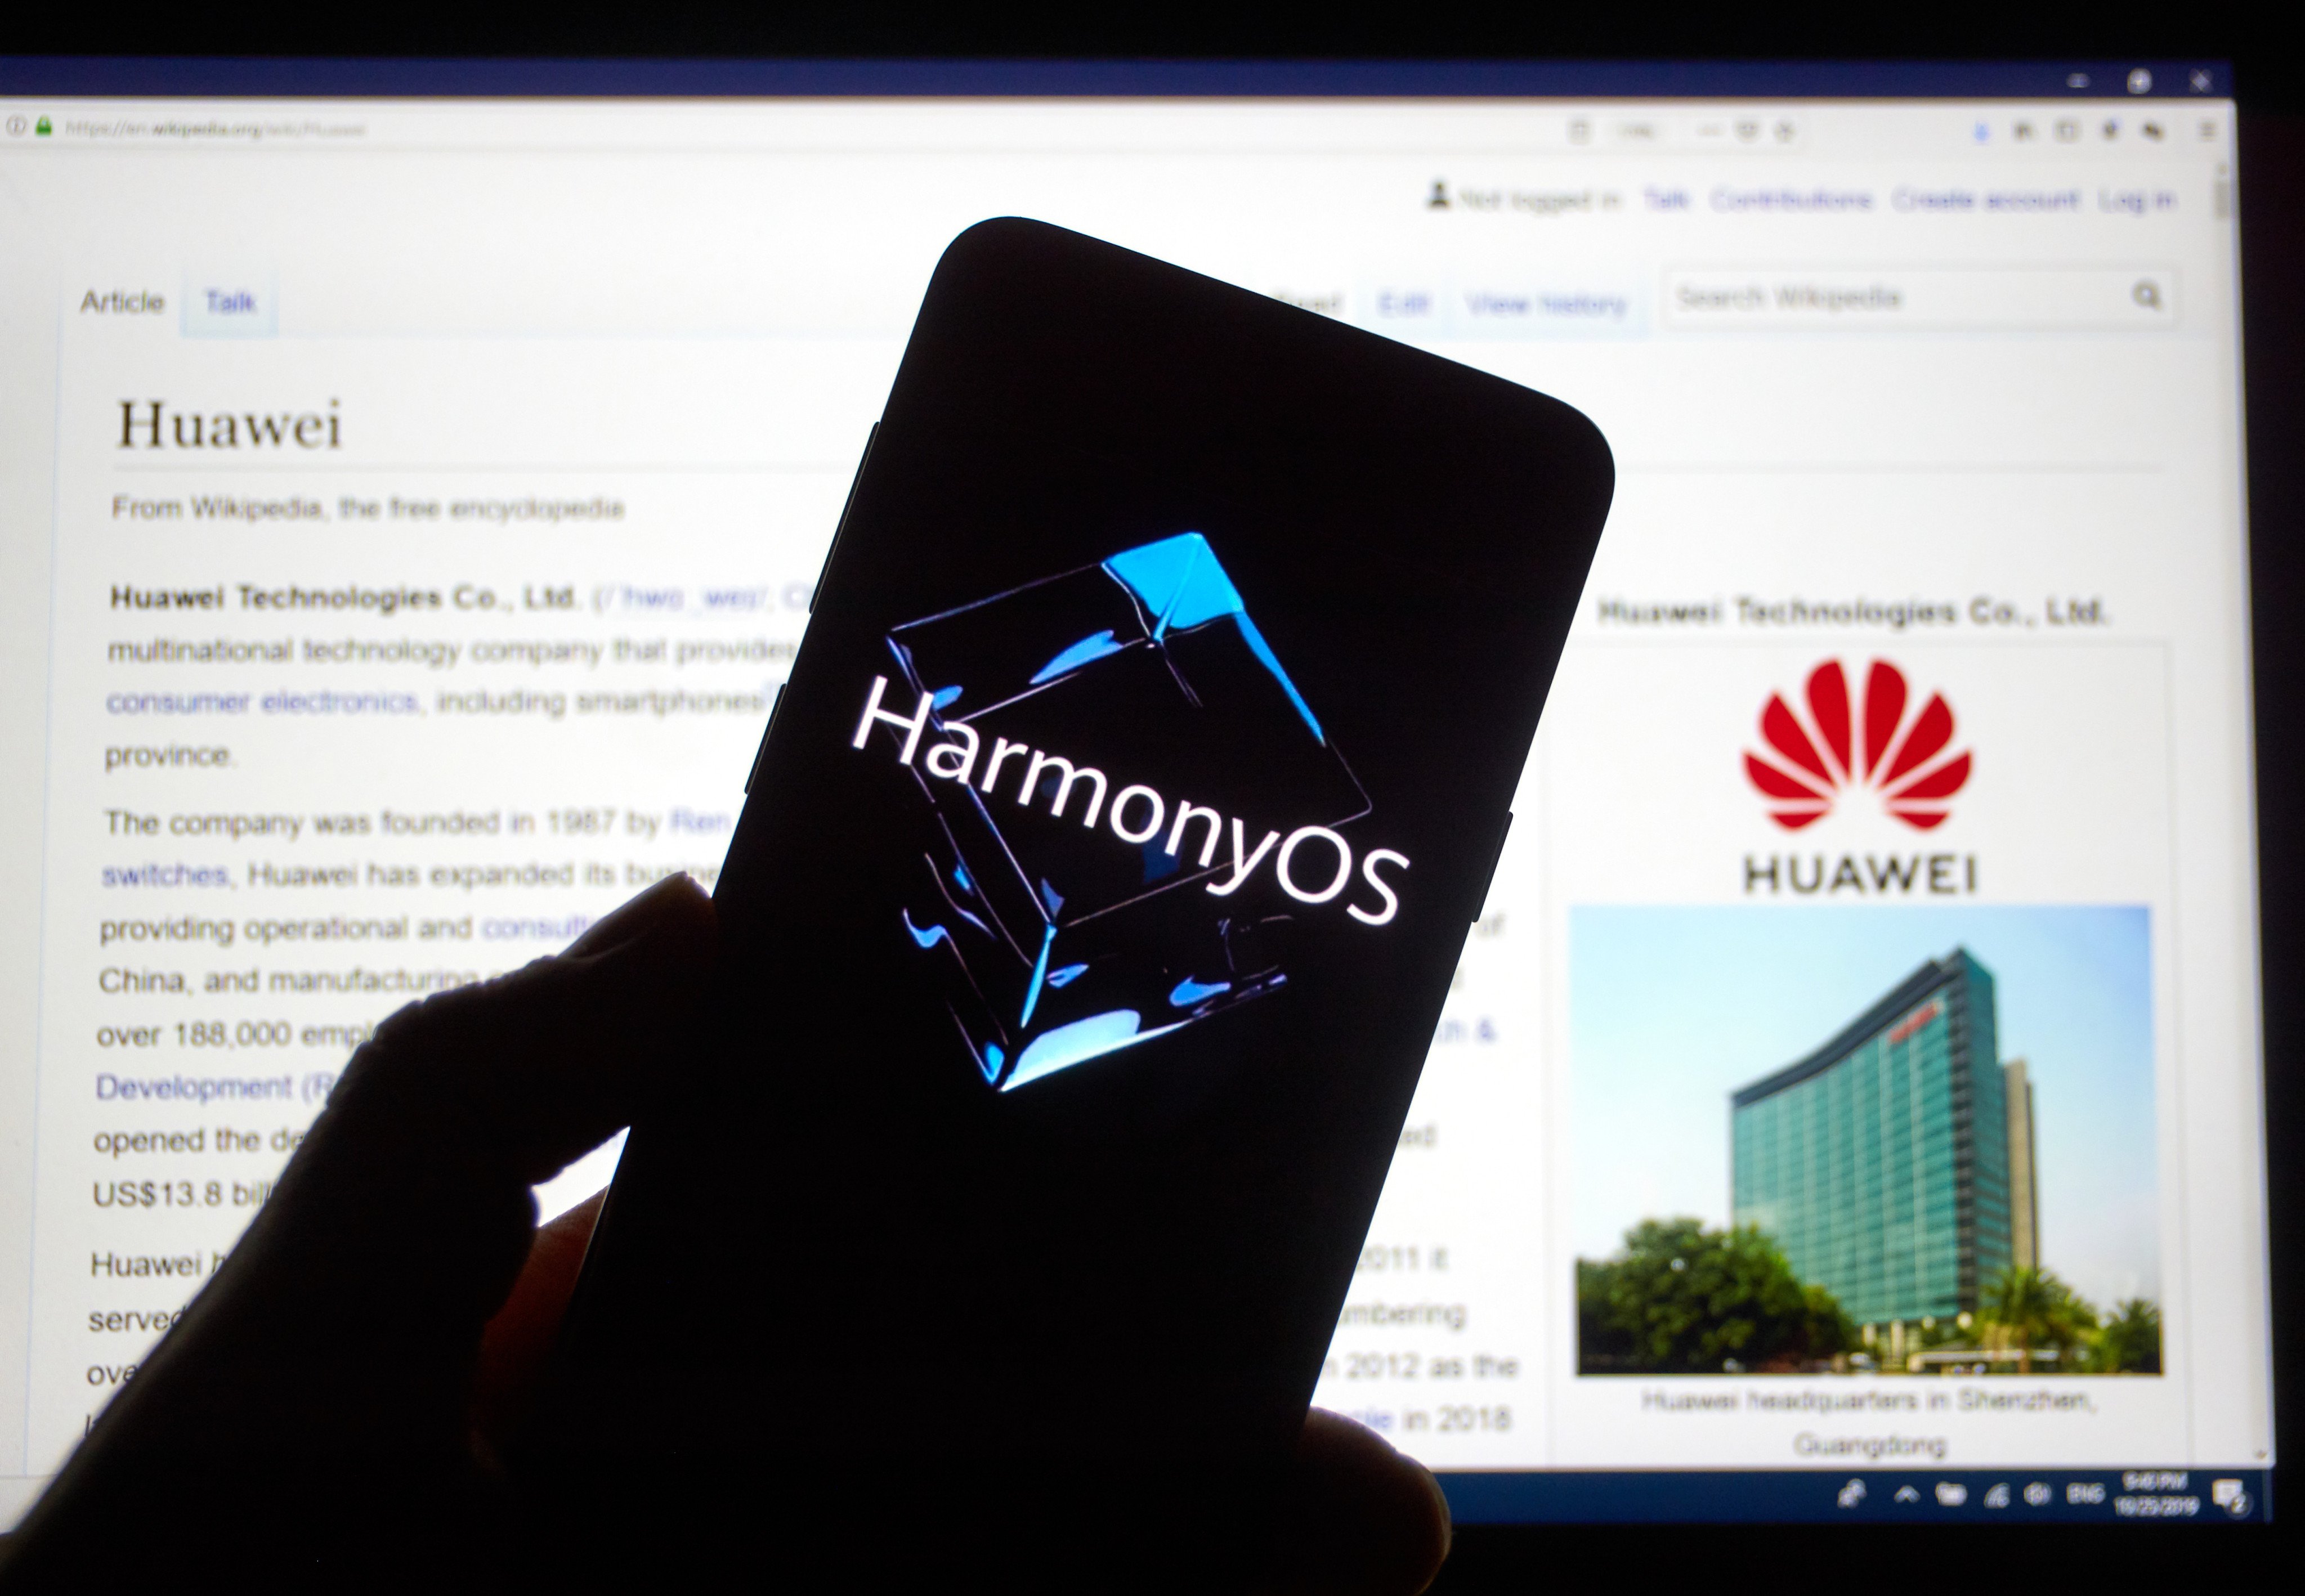 The adoption of HarmonyOS on the mainland has accelerated on the back of rapid growth in Huawei Technologies’ smartphone shipments. Photo: Shutterstock